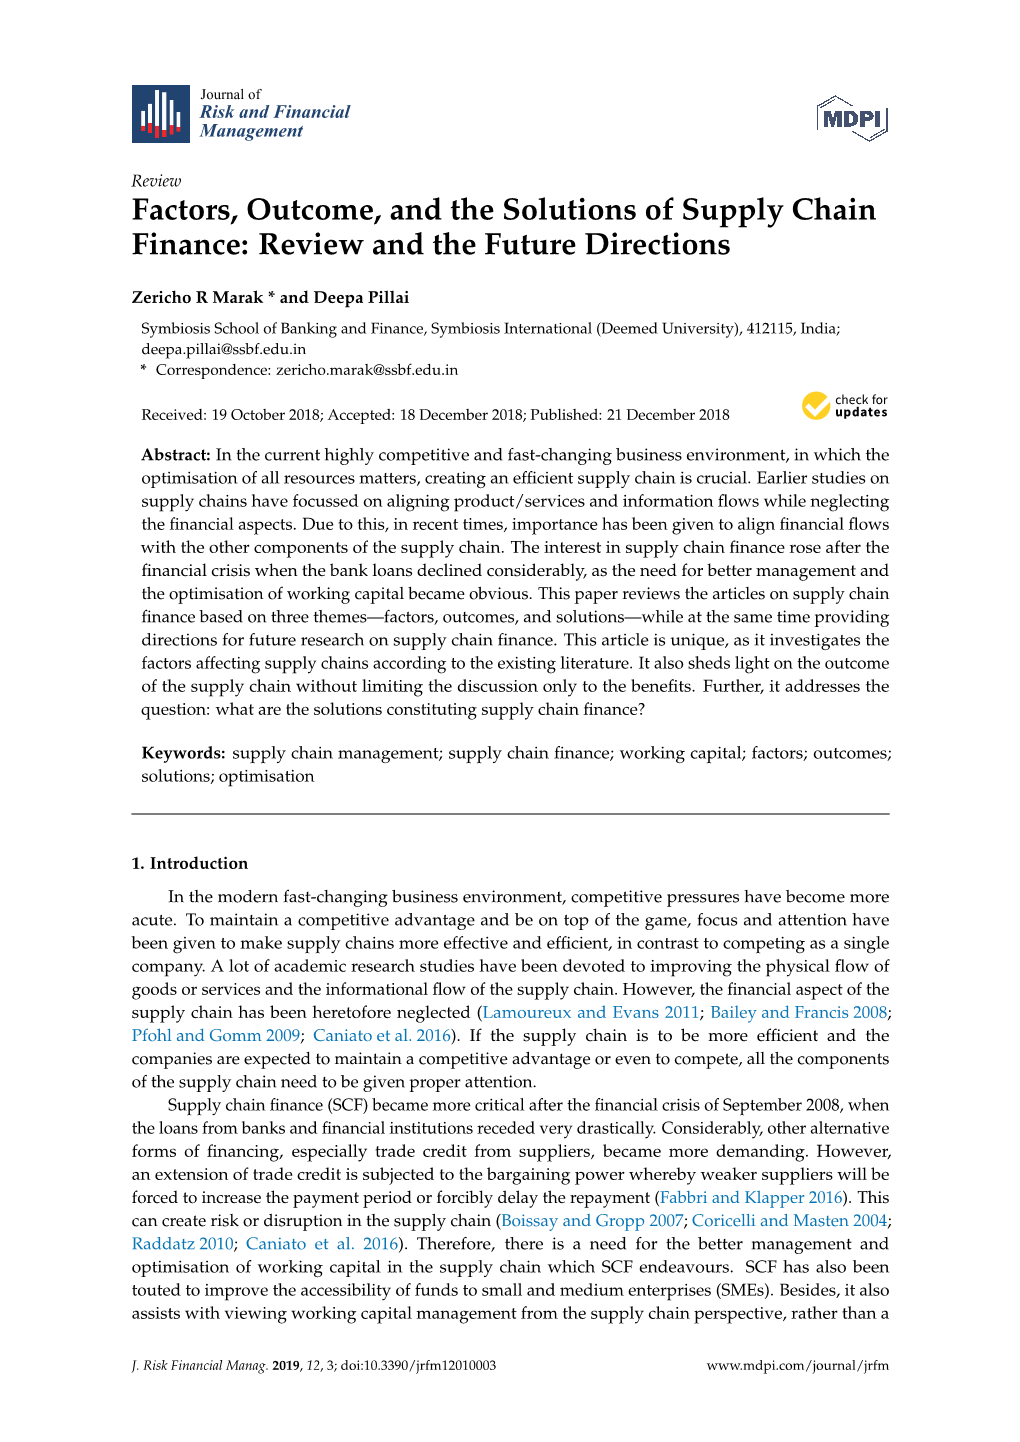 Factors, Outcome, and the Solutions of Supply Chain Finance: Review and the Future Directions